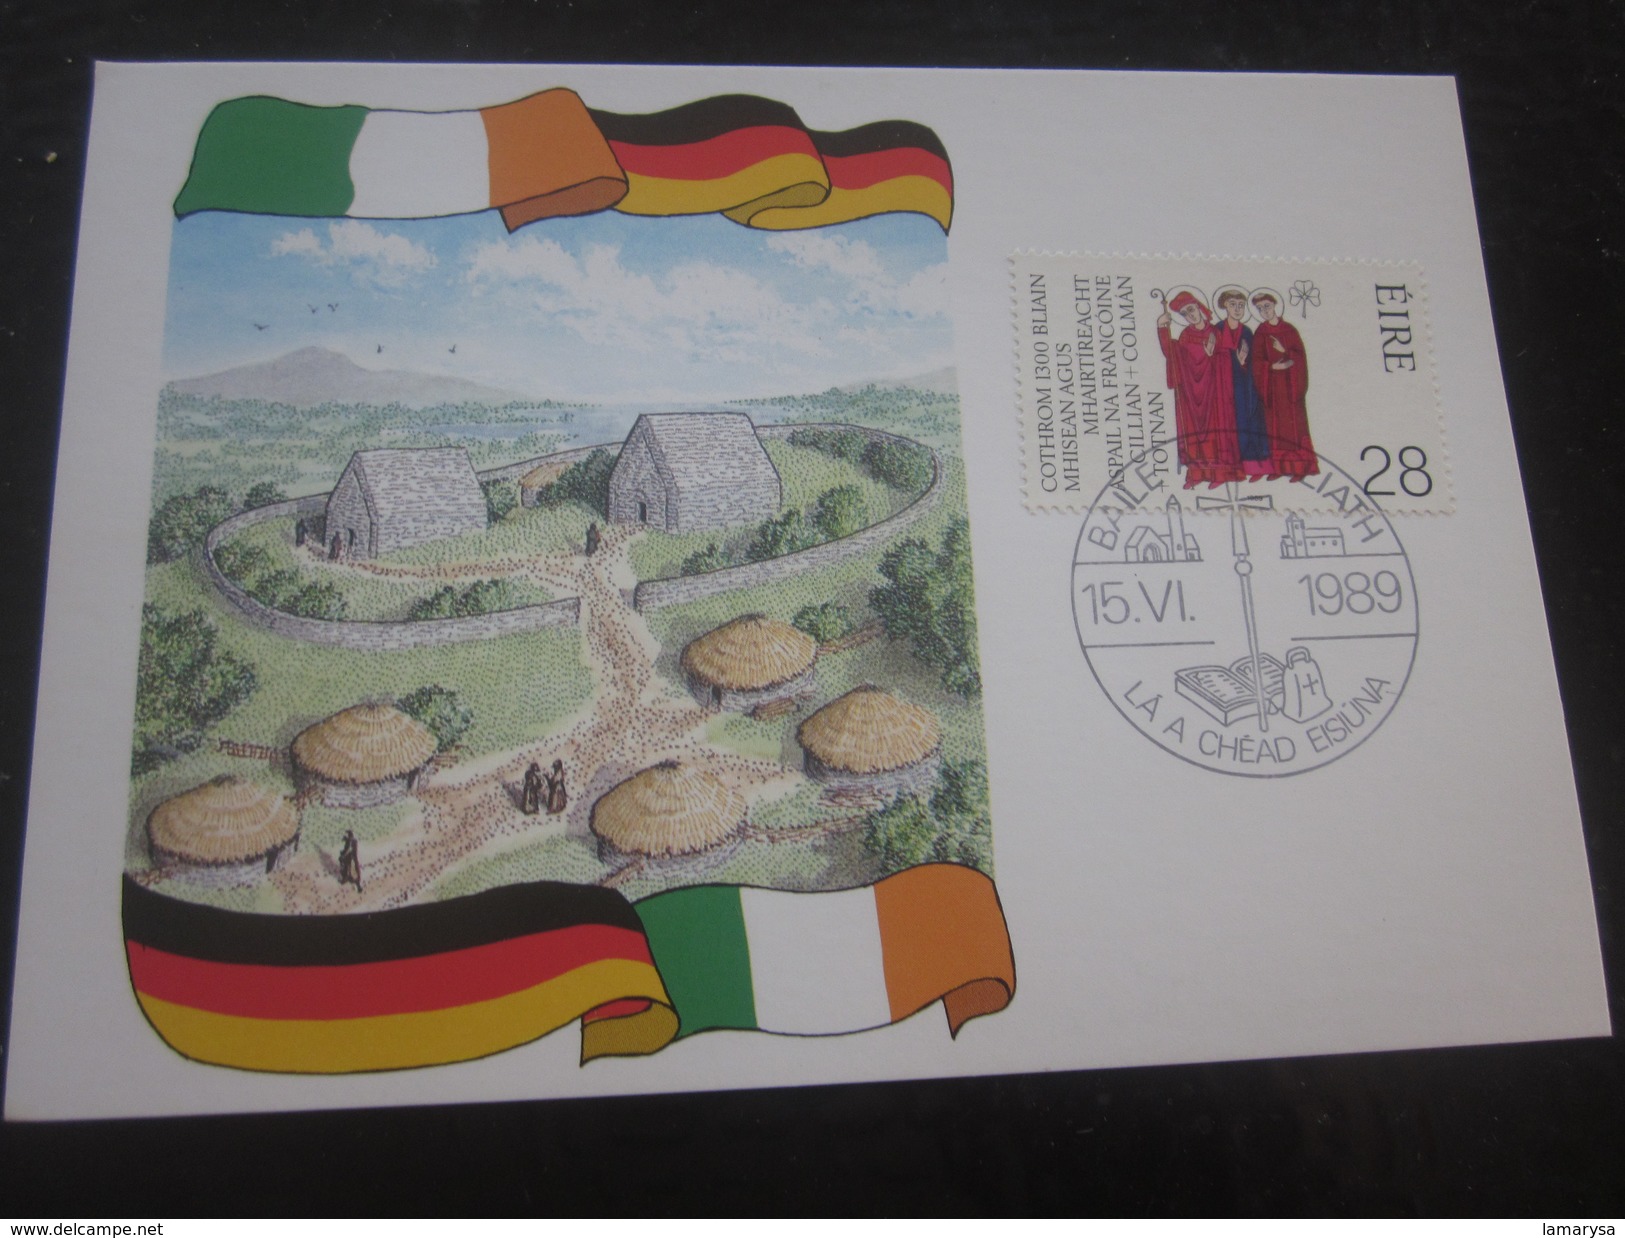 4 FDC First Day Cover Timbres - Europe - Eire Irlande - FDC-Marcophilie-Lettre - Document Avion-By Air-mail-1989 - FDC